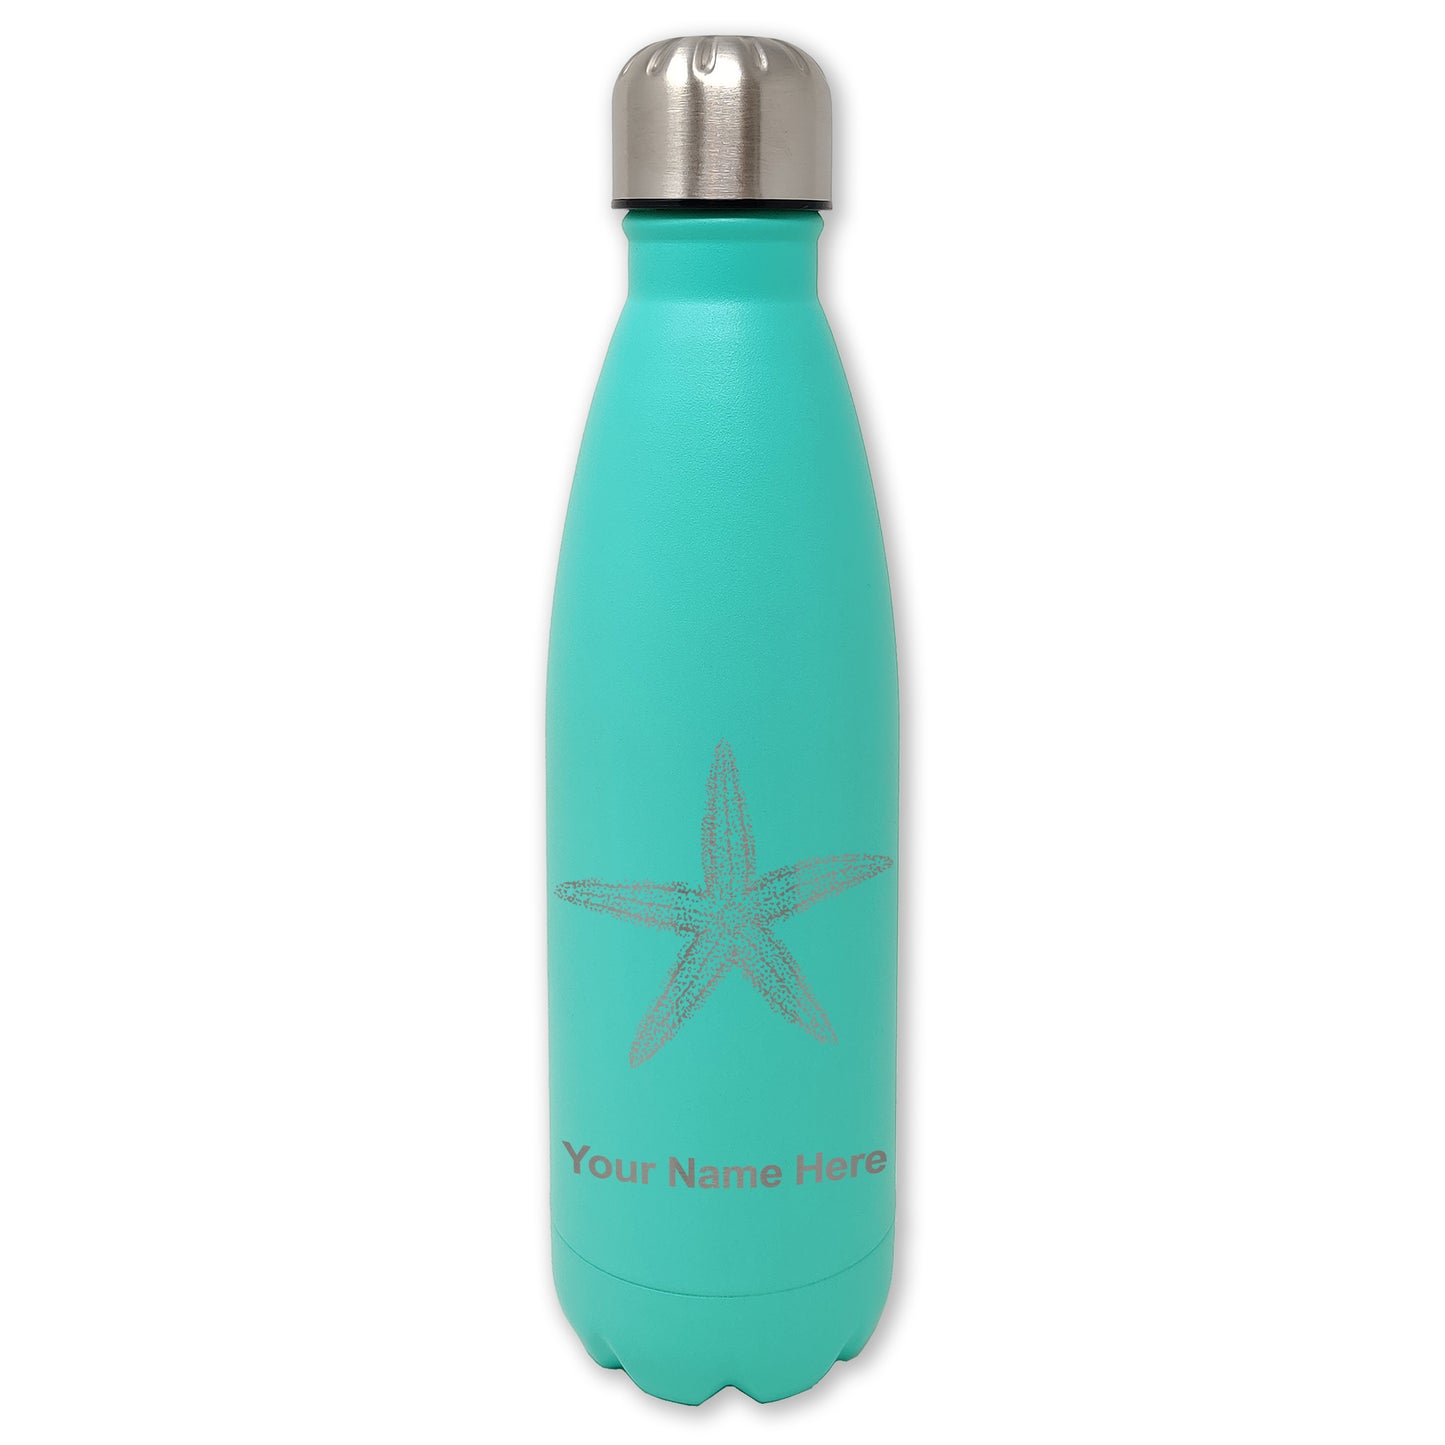 LaserGram Double Wall Water Bottle, Starfish, Personalized Engraving Included